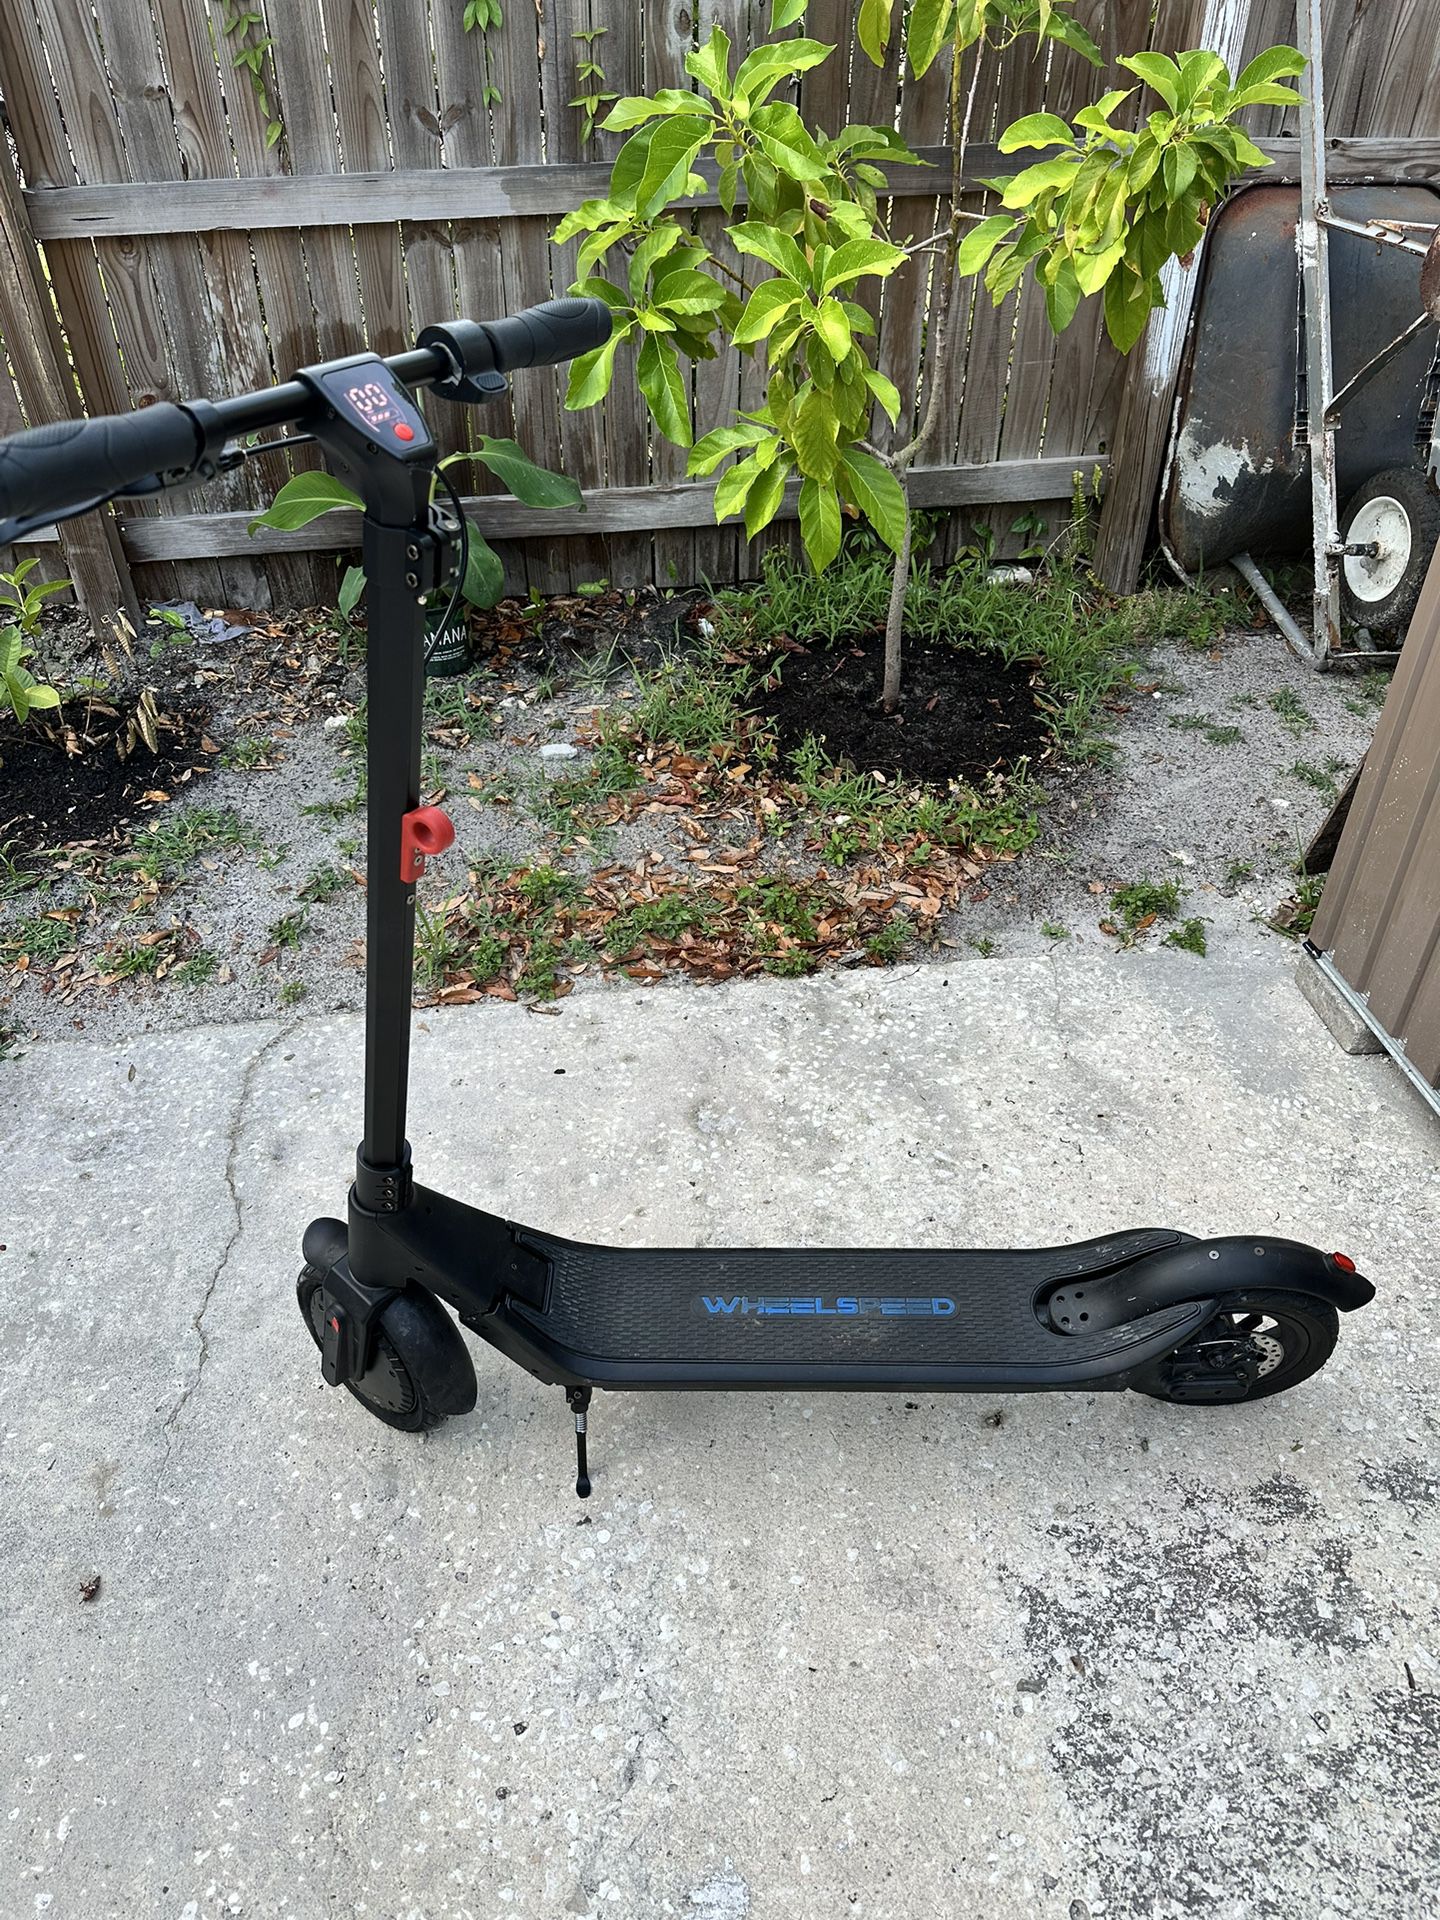 Wheelspeed Scooter 